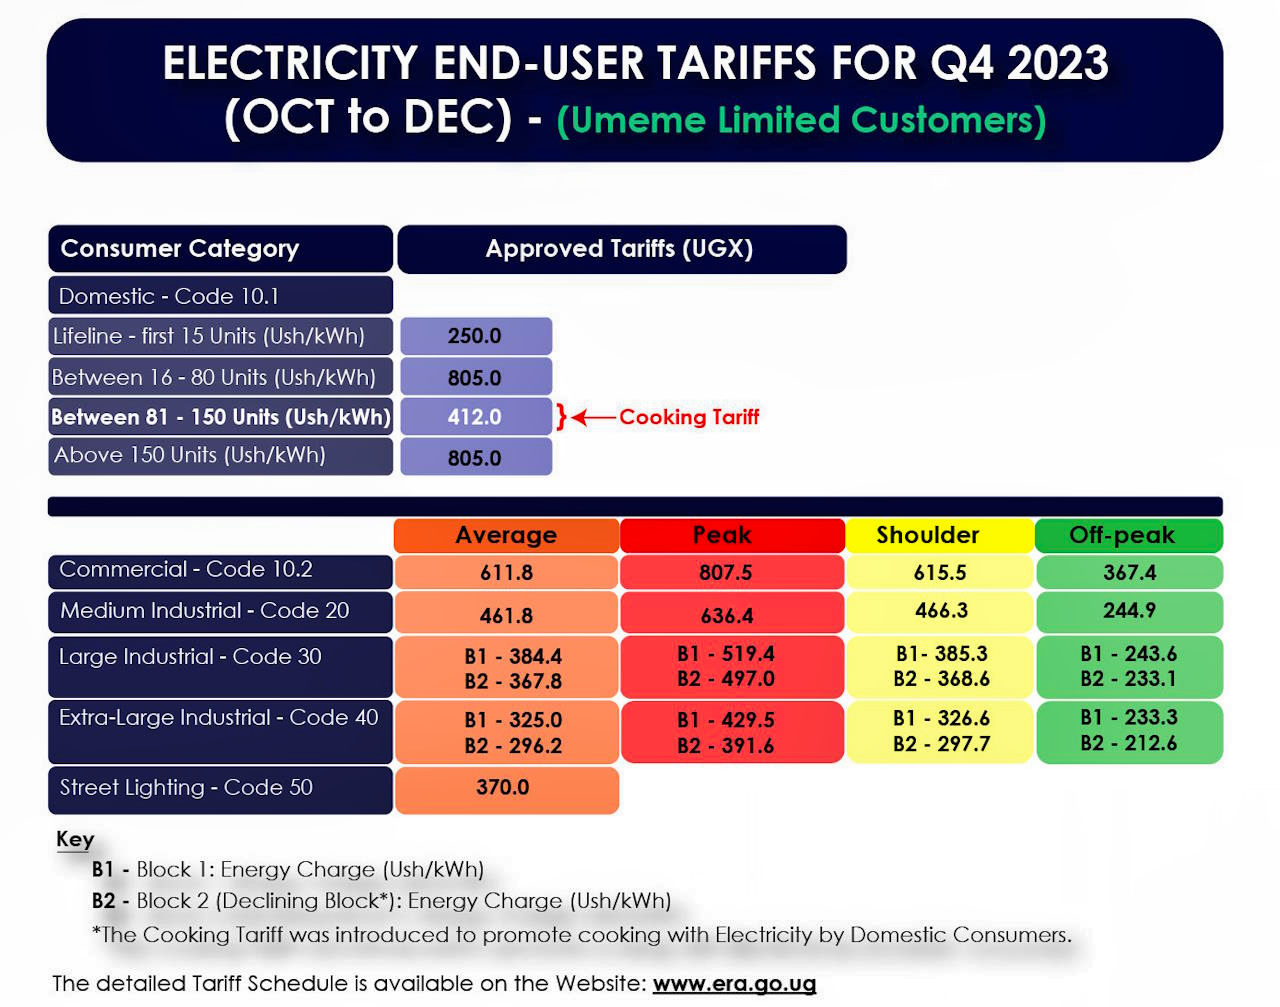 Graphic showing electricity tariffs for retail customers in the fourth quarter of 2023